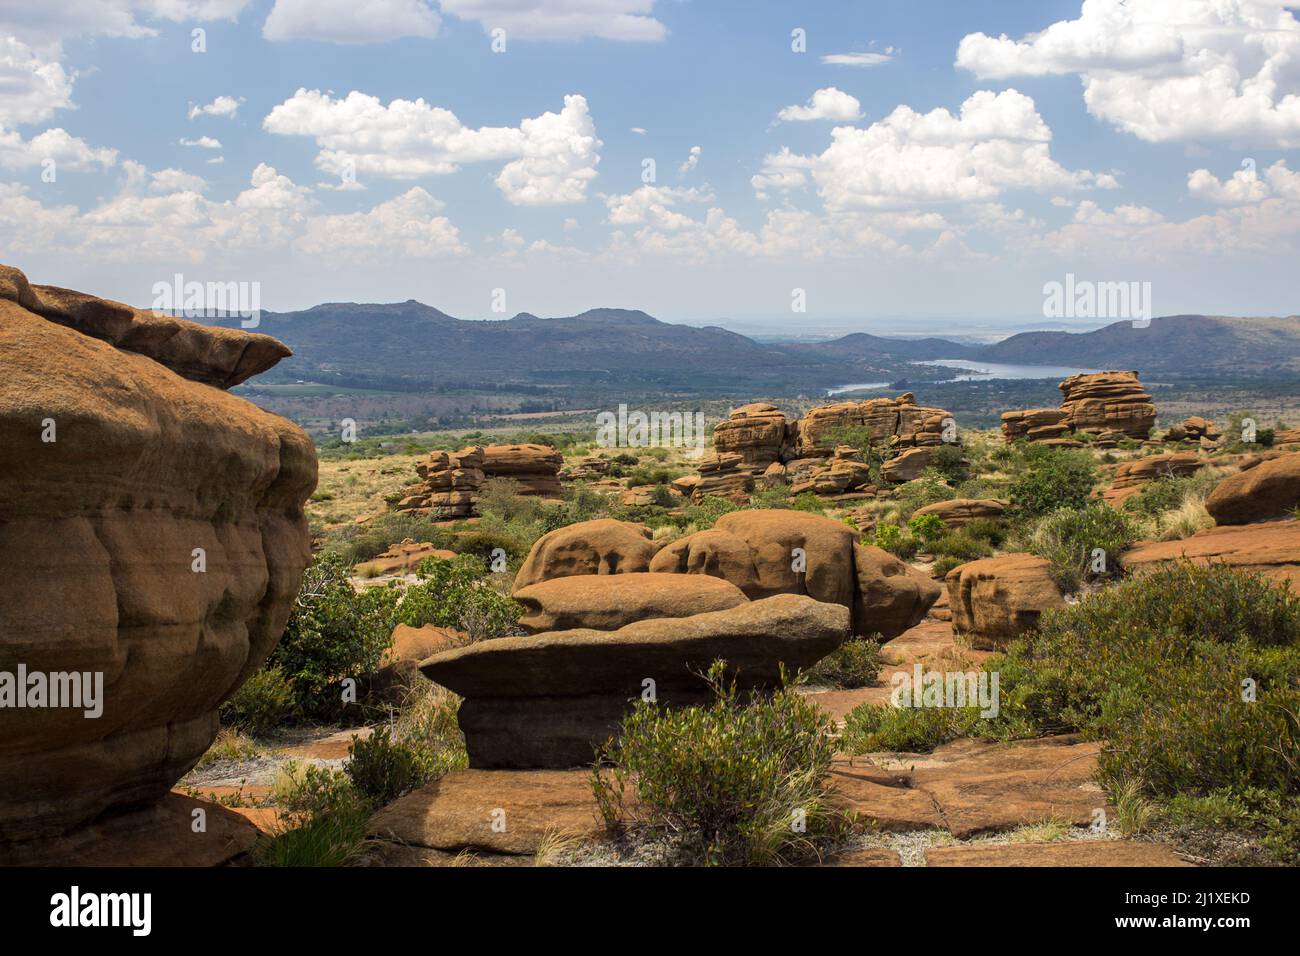 The boulder strewn landscape of the Magaliesberg mountains in South Africa Stock Photo